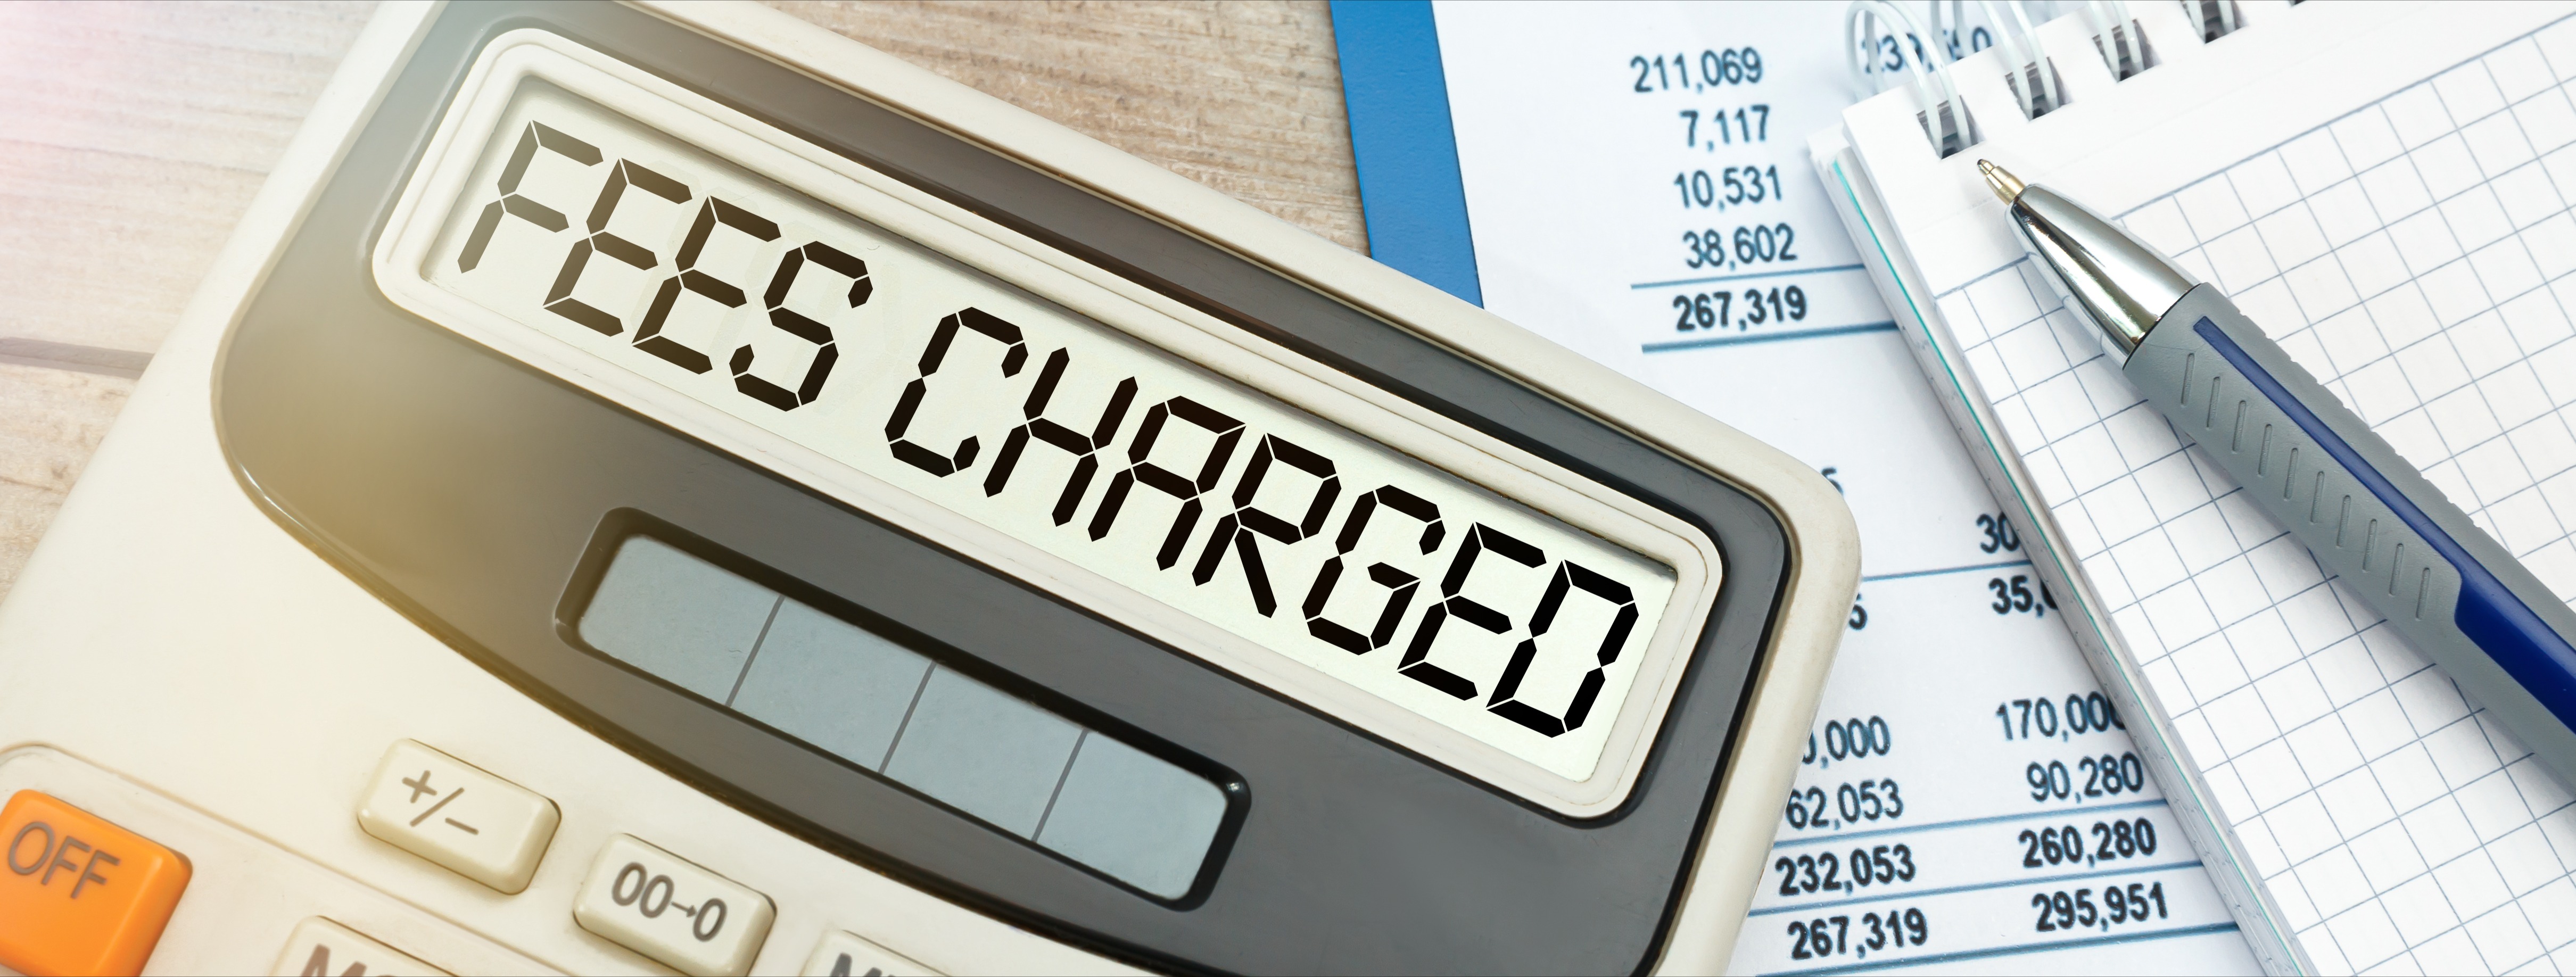 FEES CHARGED words on calculator